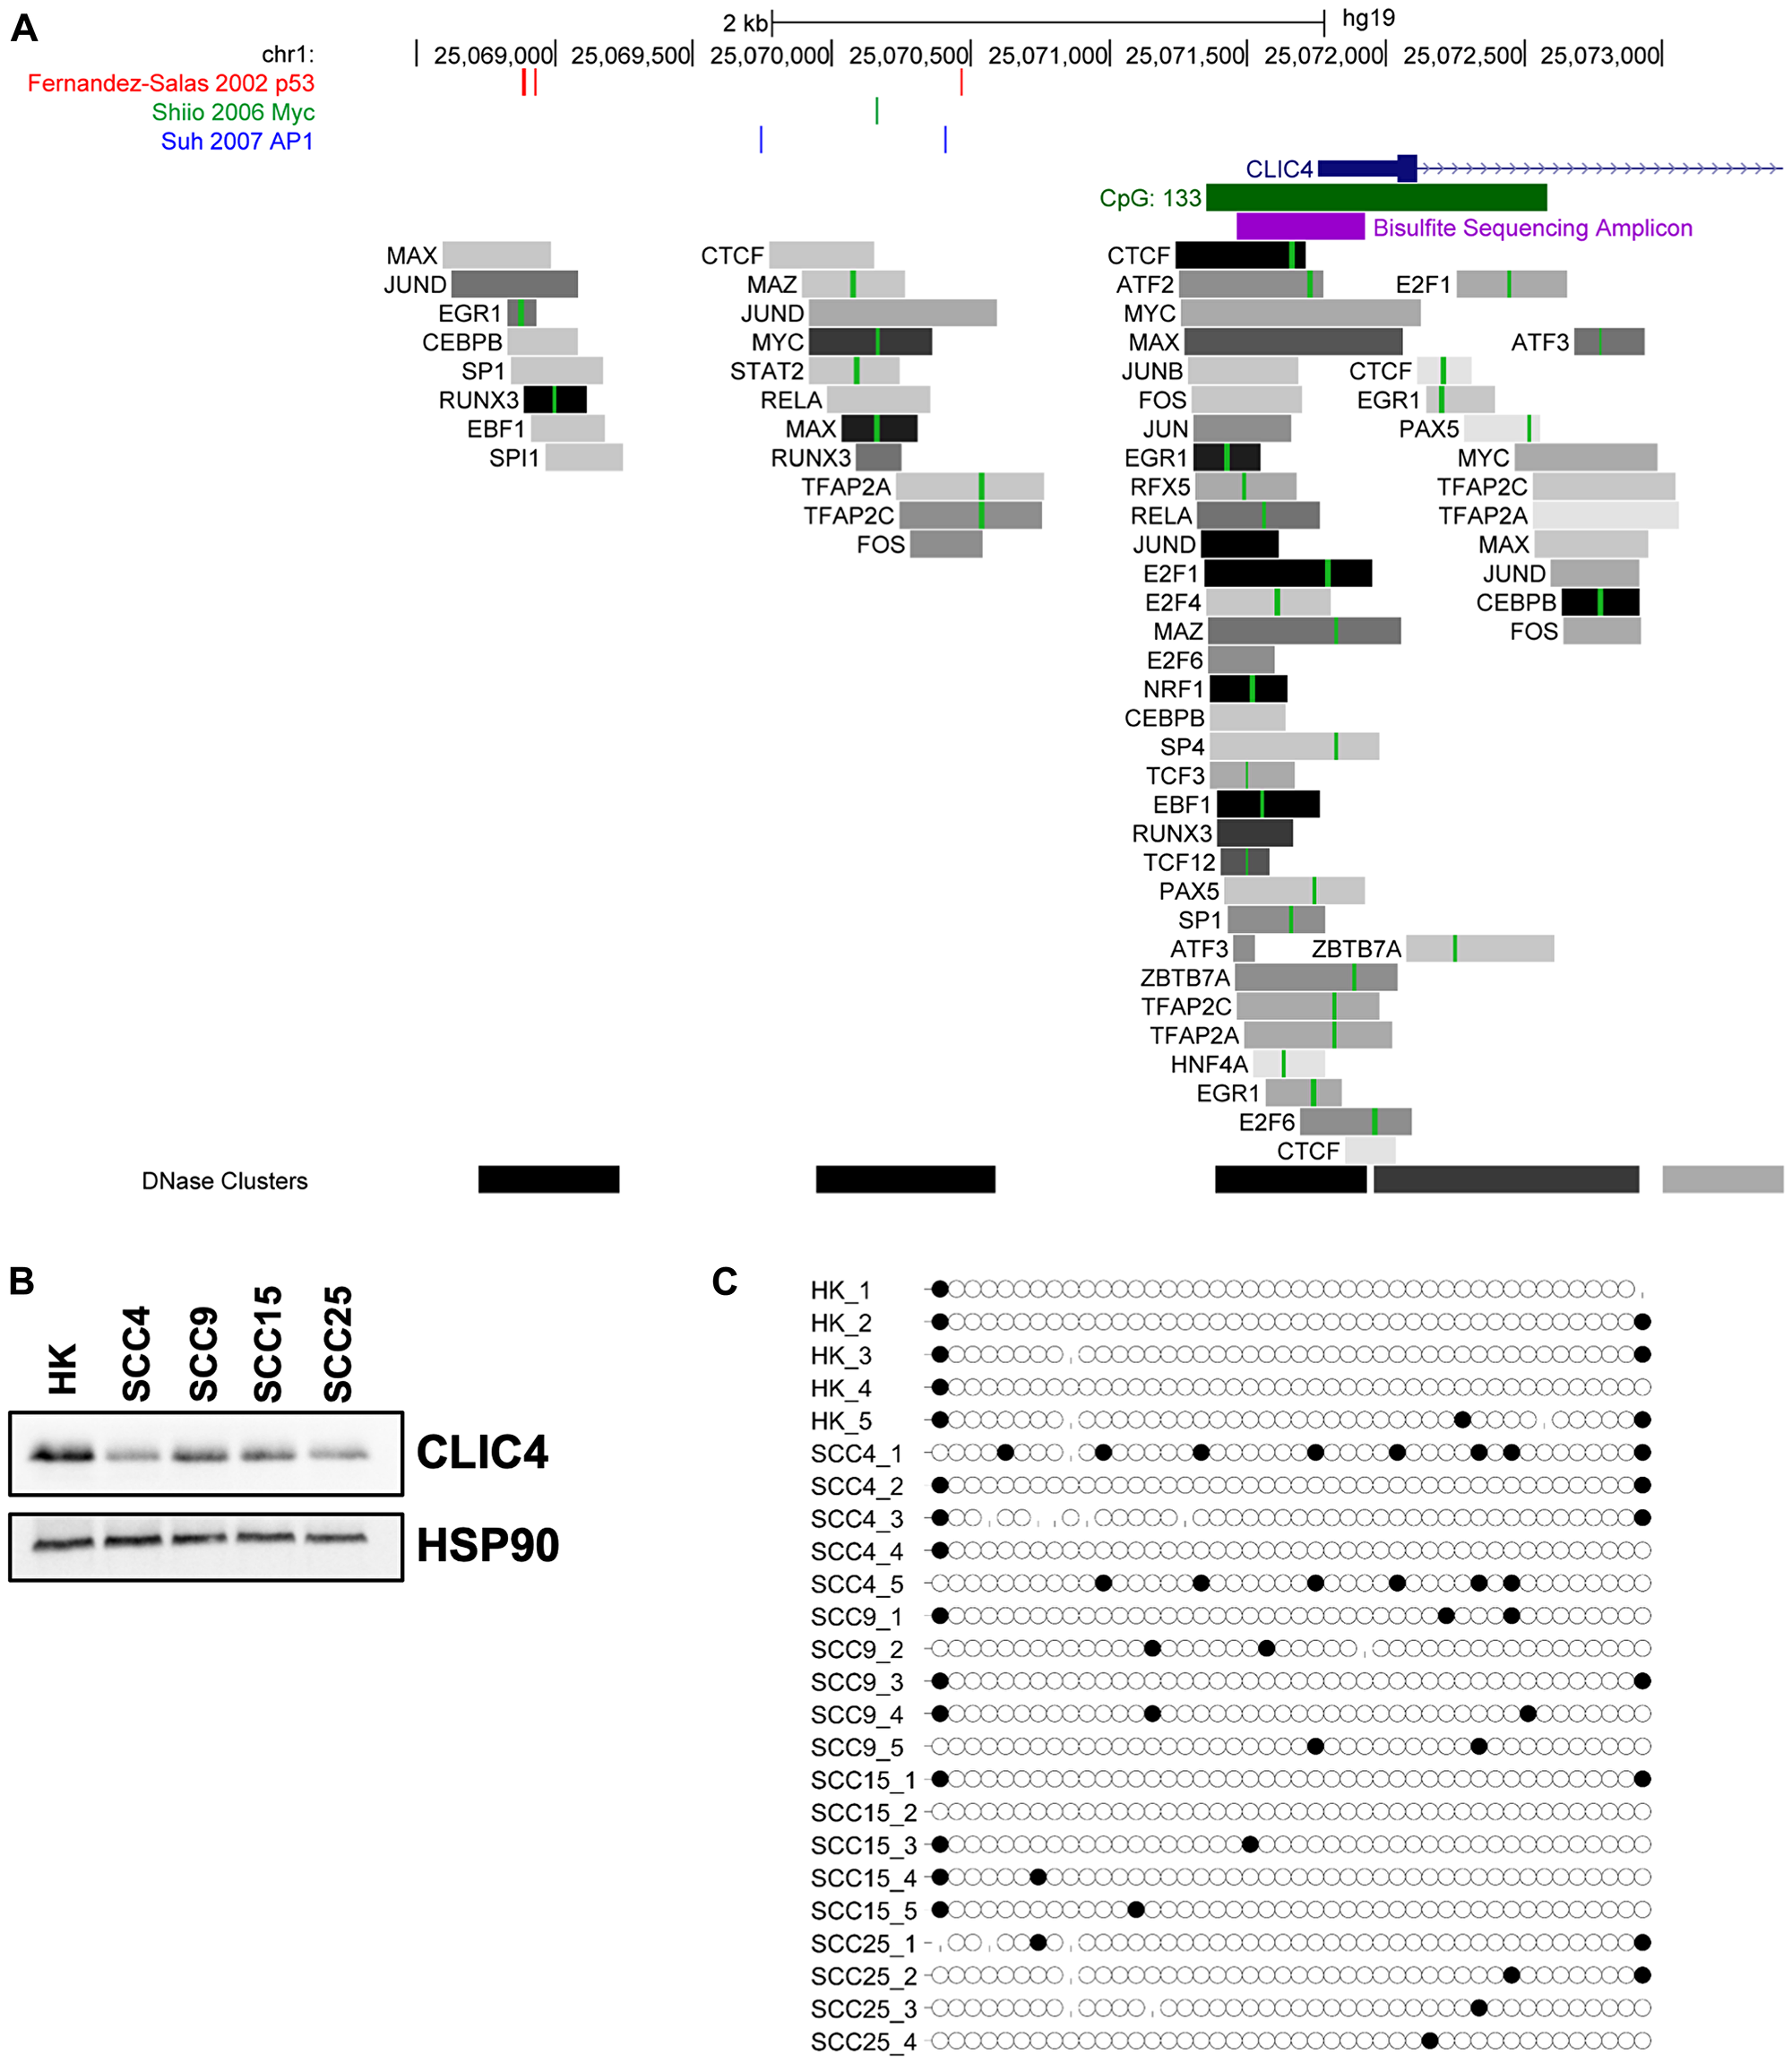 Cancer-associated transcription factors, but not CpG island methylation, regulate CLIC4 expression.